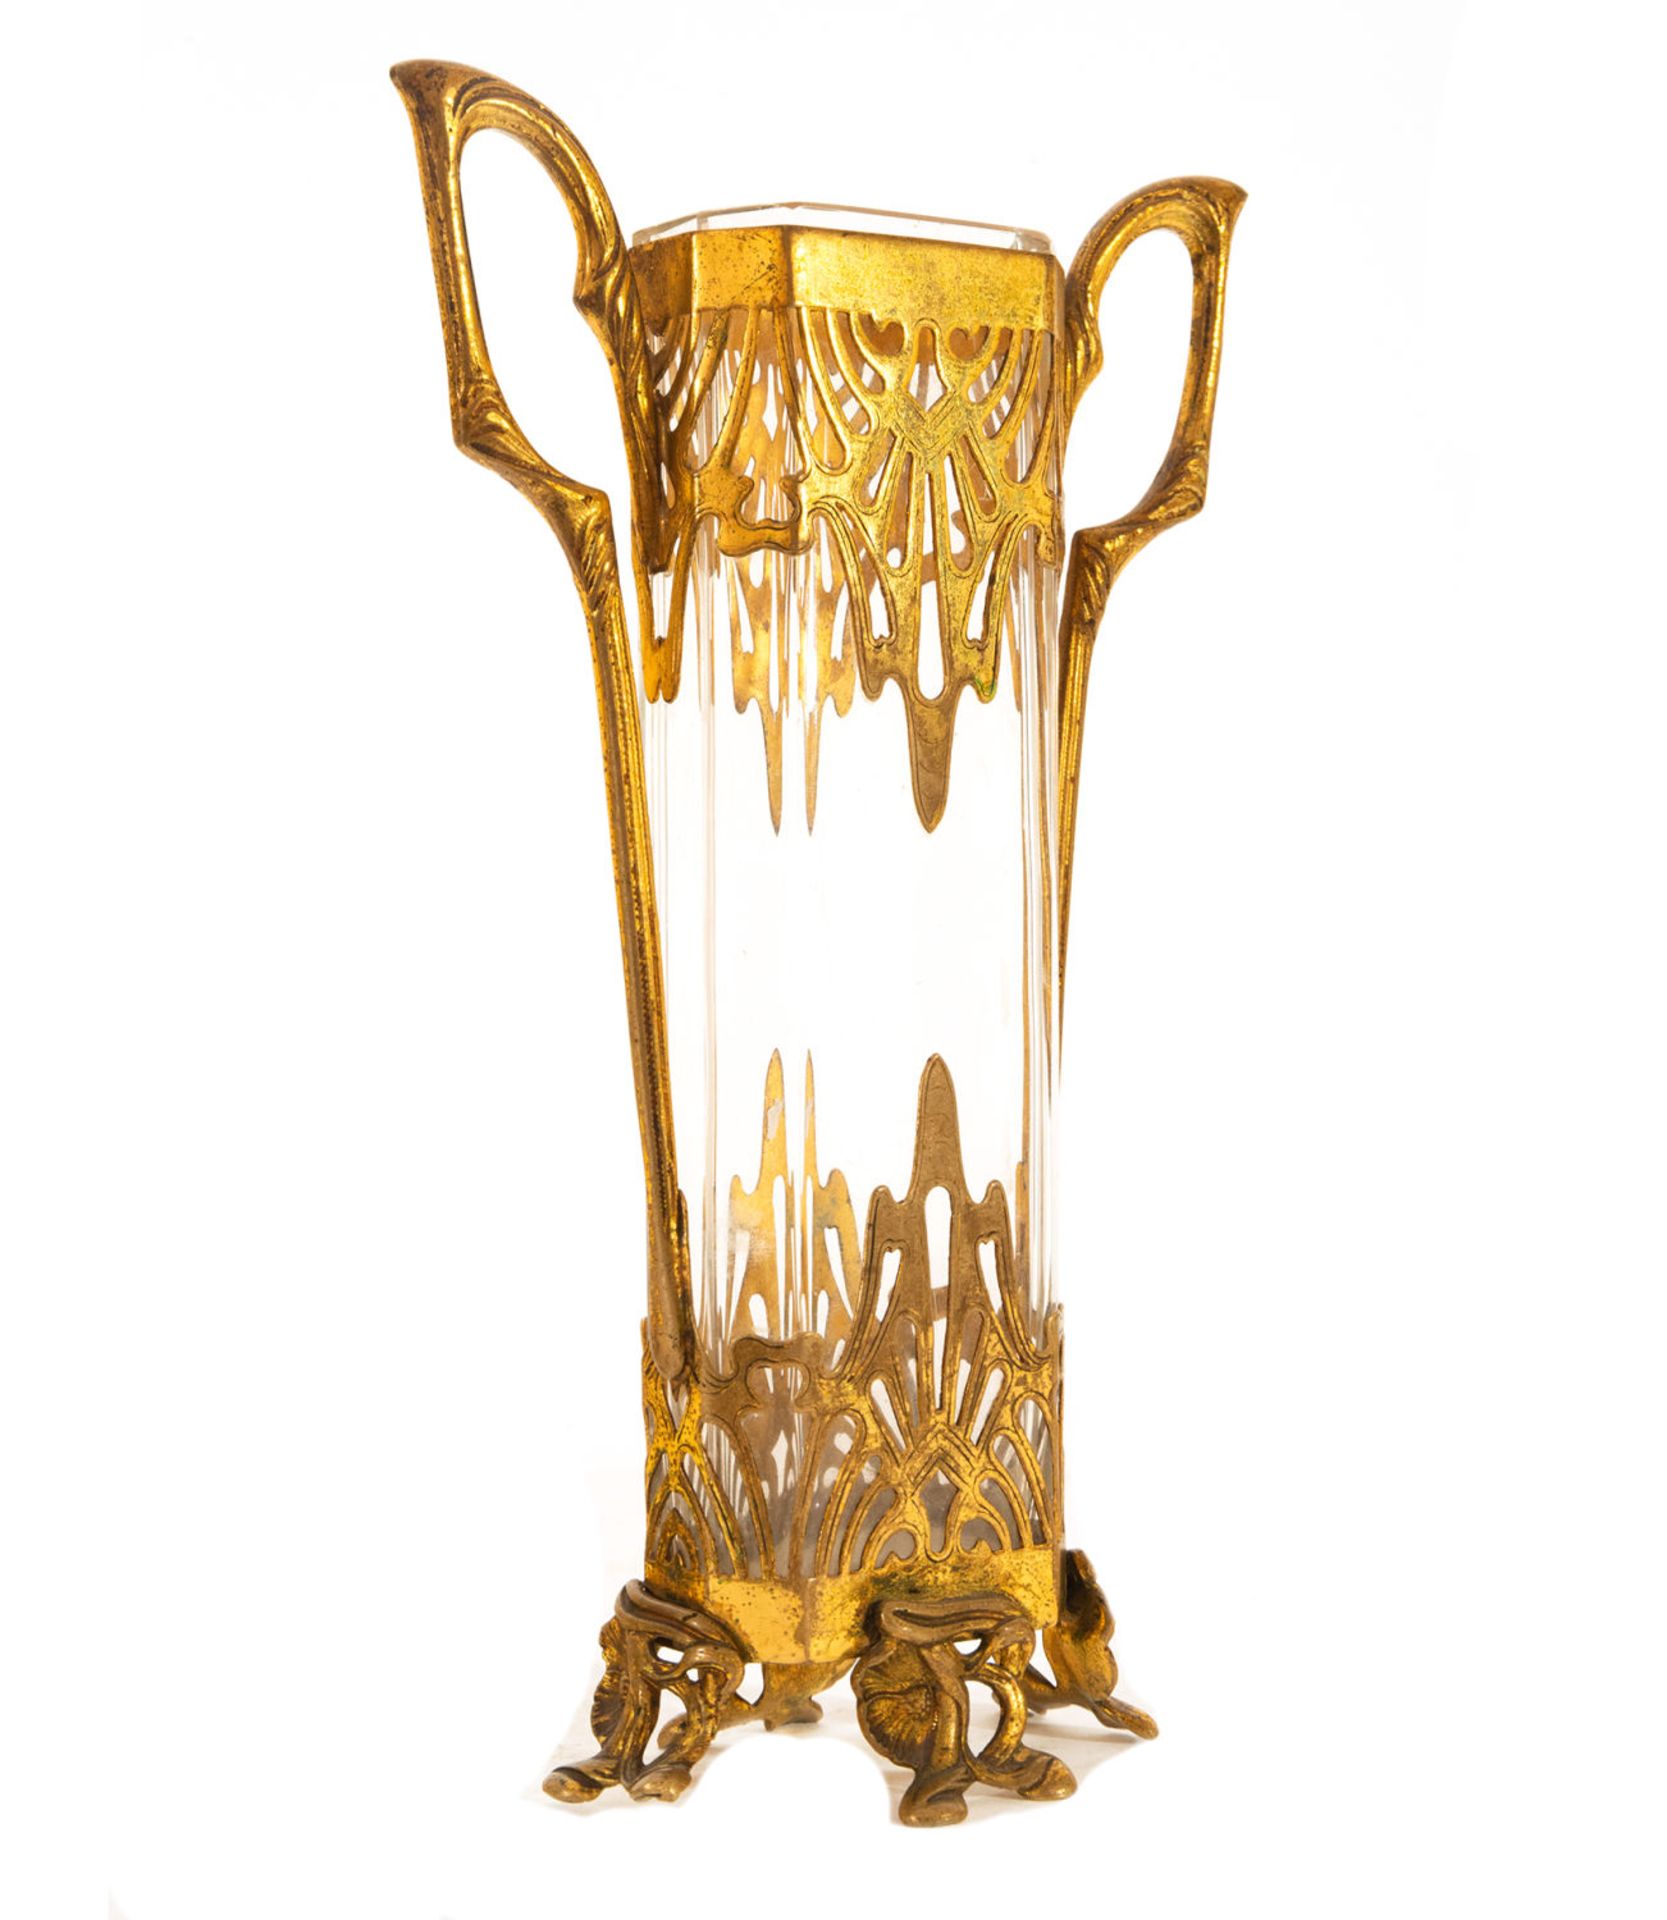 Art Nouveau Vase in Crystal and Gilt Bronze, Austria, early 20th century - Image 4 of 7